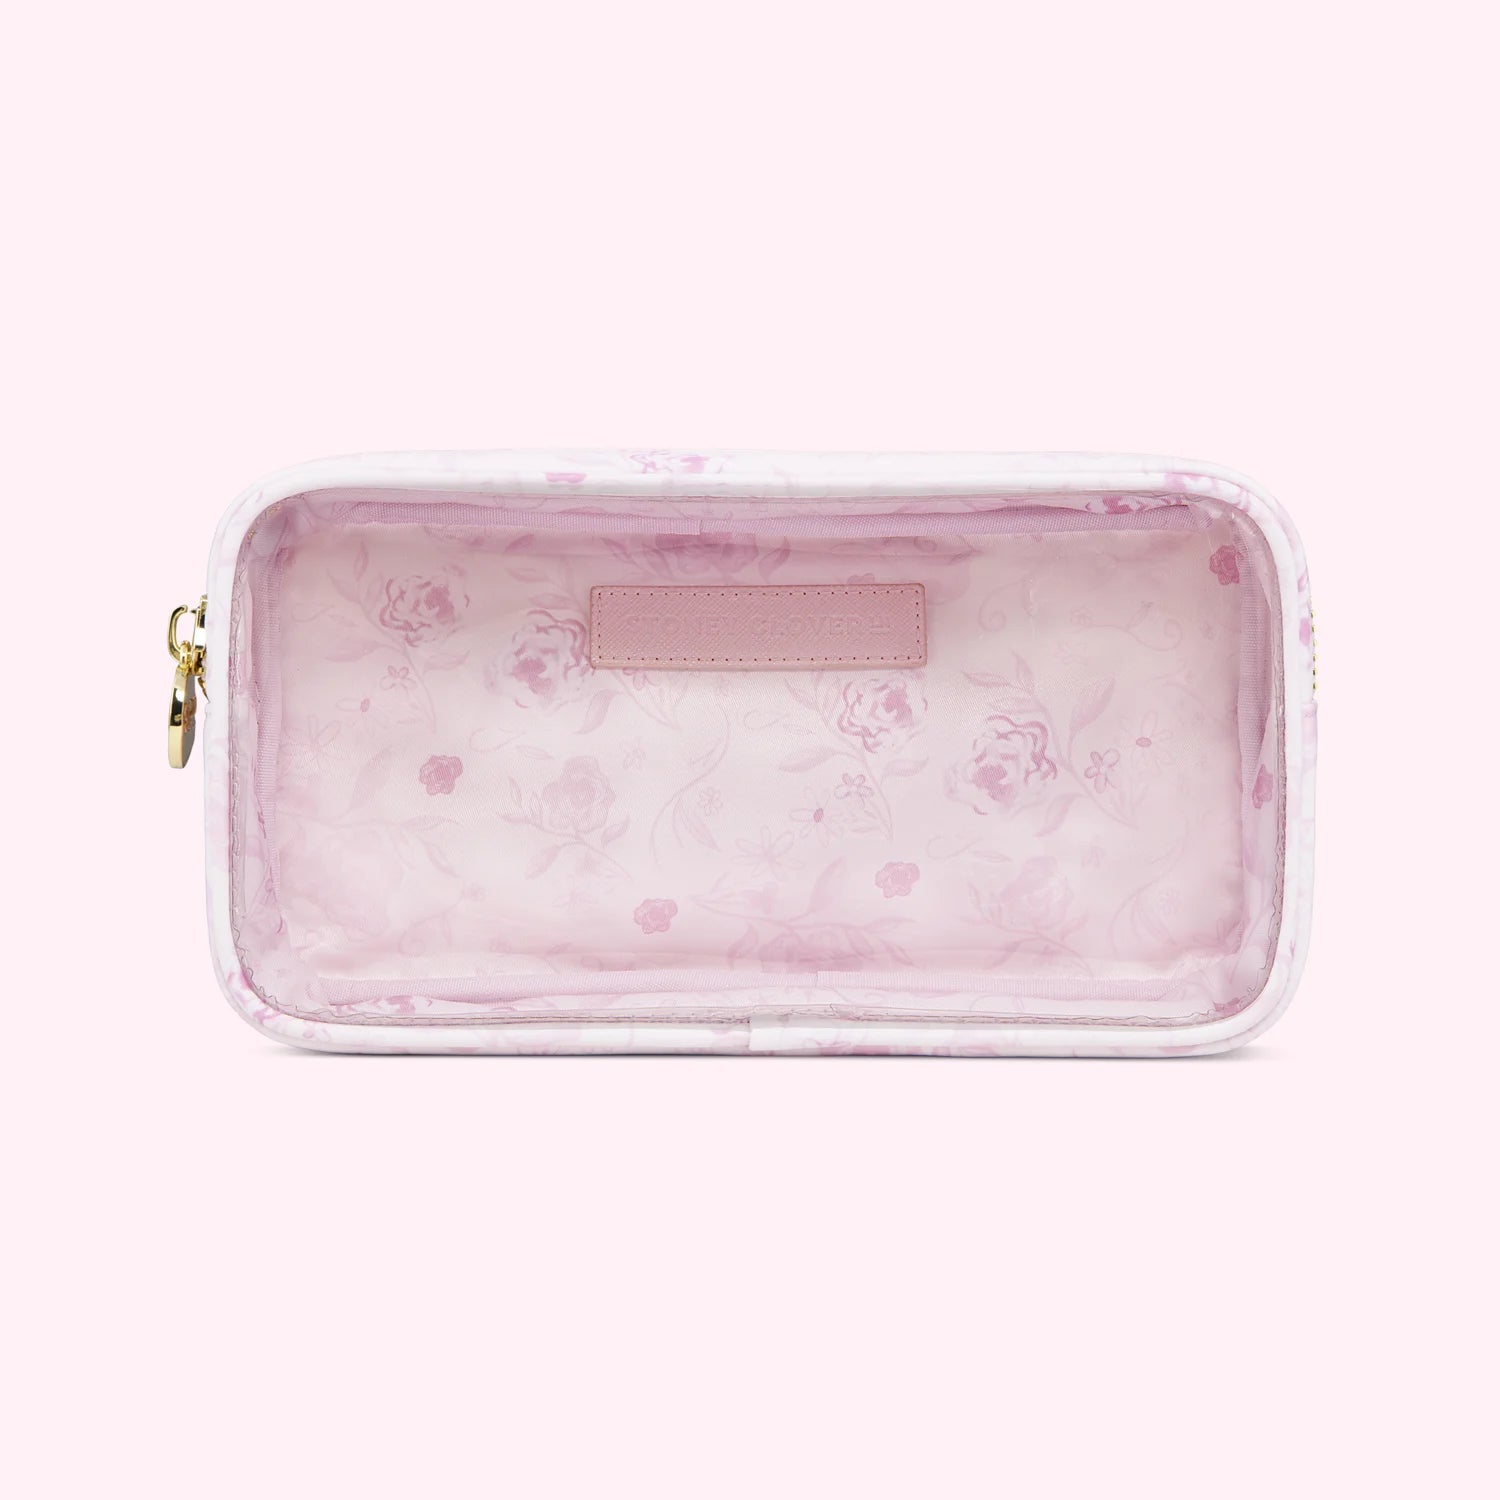 Stoney clover lane- small spring Clear front pouch – 40 Love Lifestyle